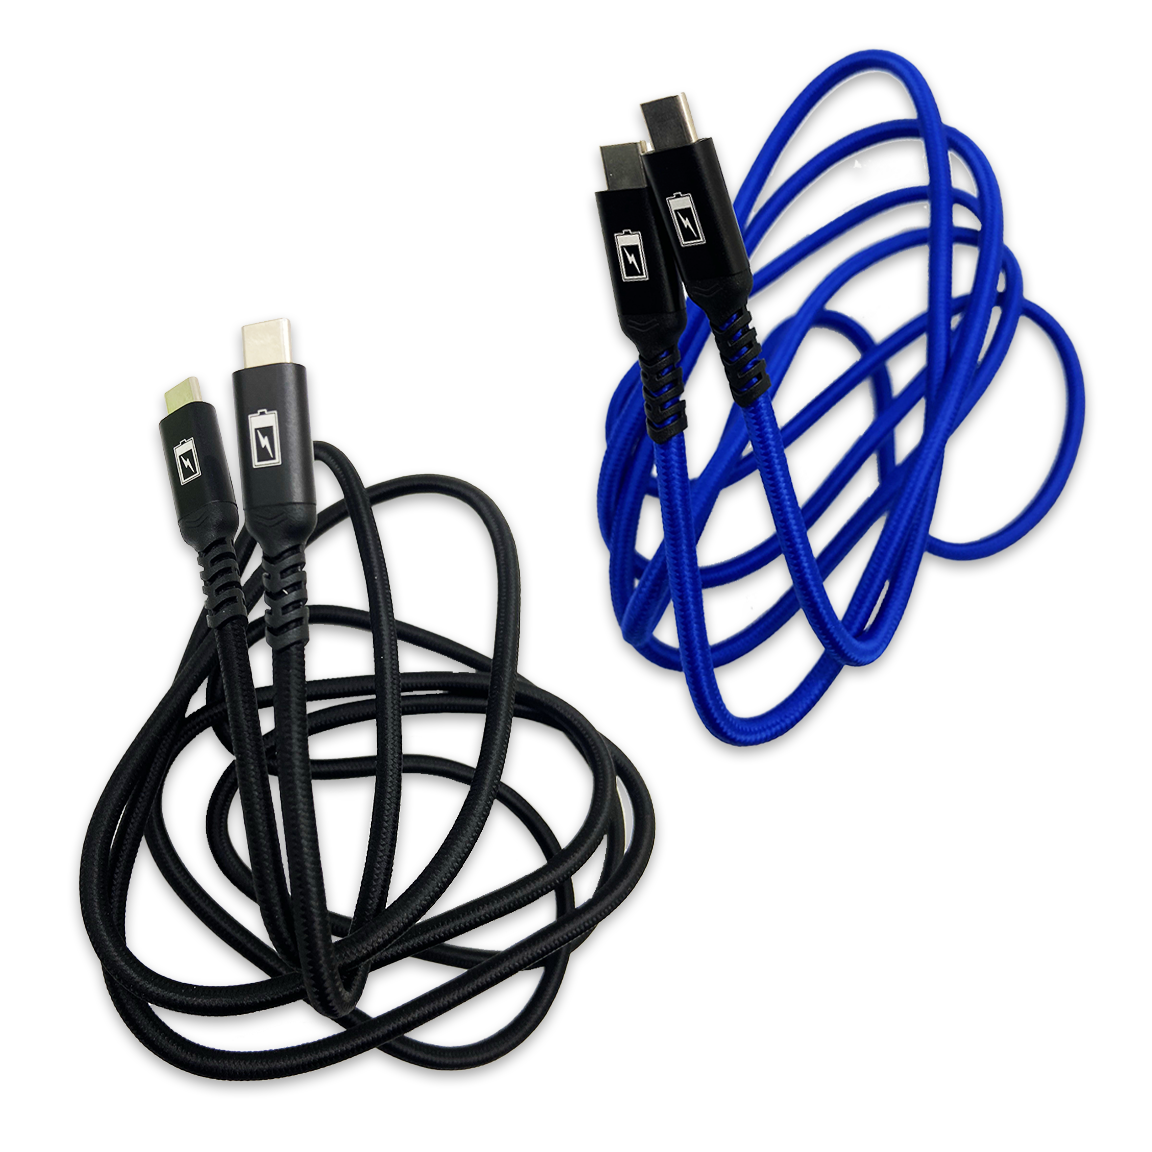 ITEM NUMBER 024619 6FT USB-C-TO-USB-C CABLE 3 PIECES PER PACK